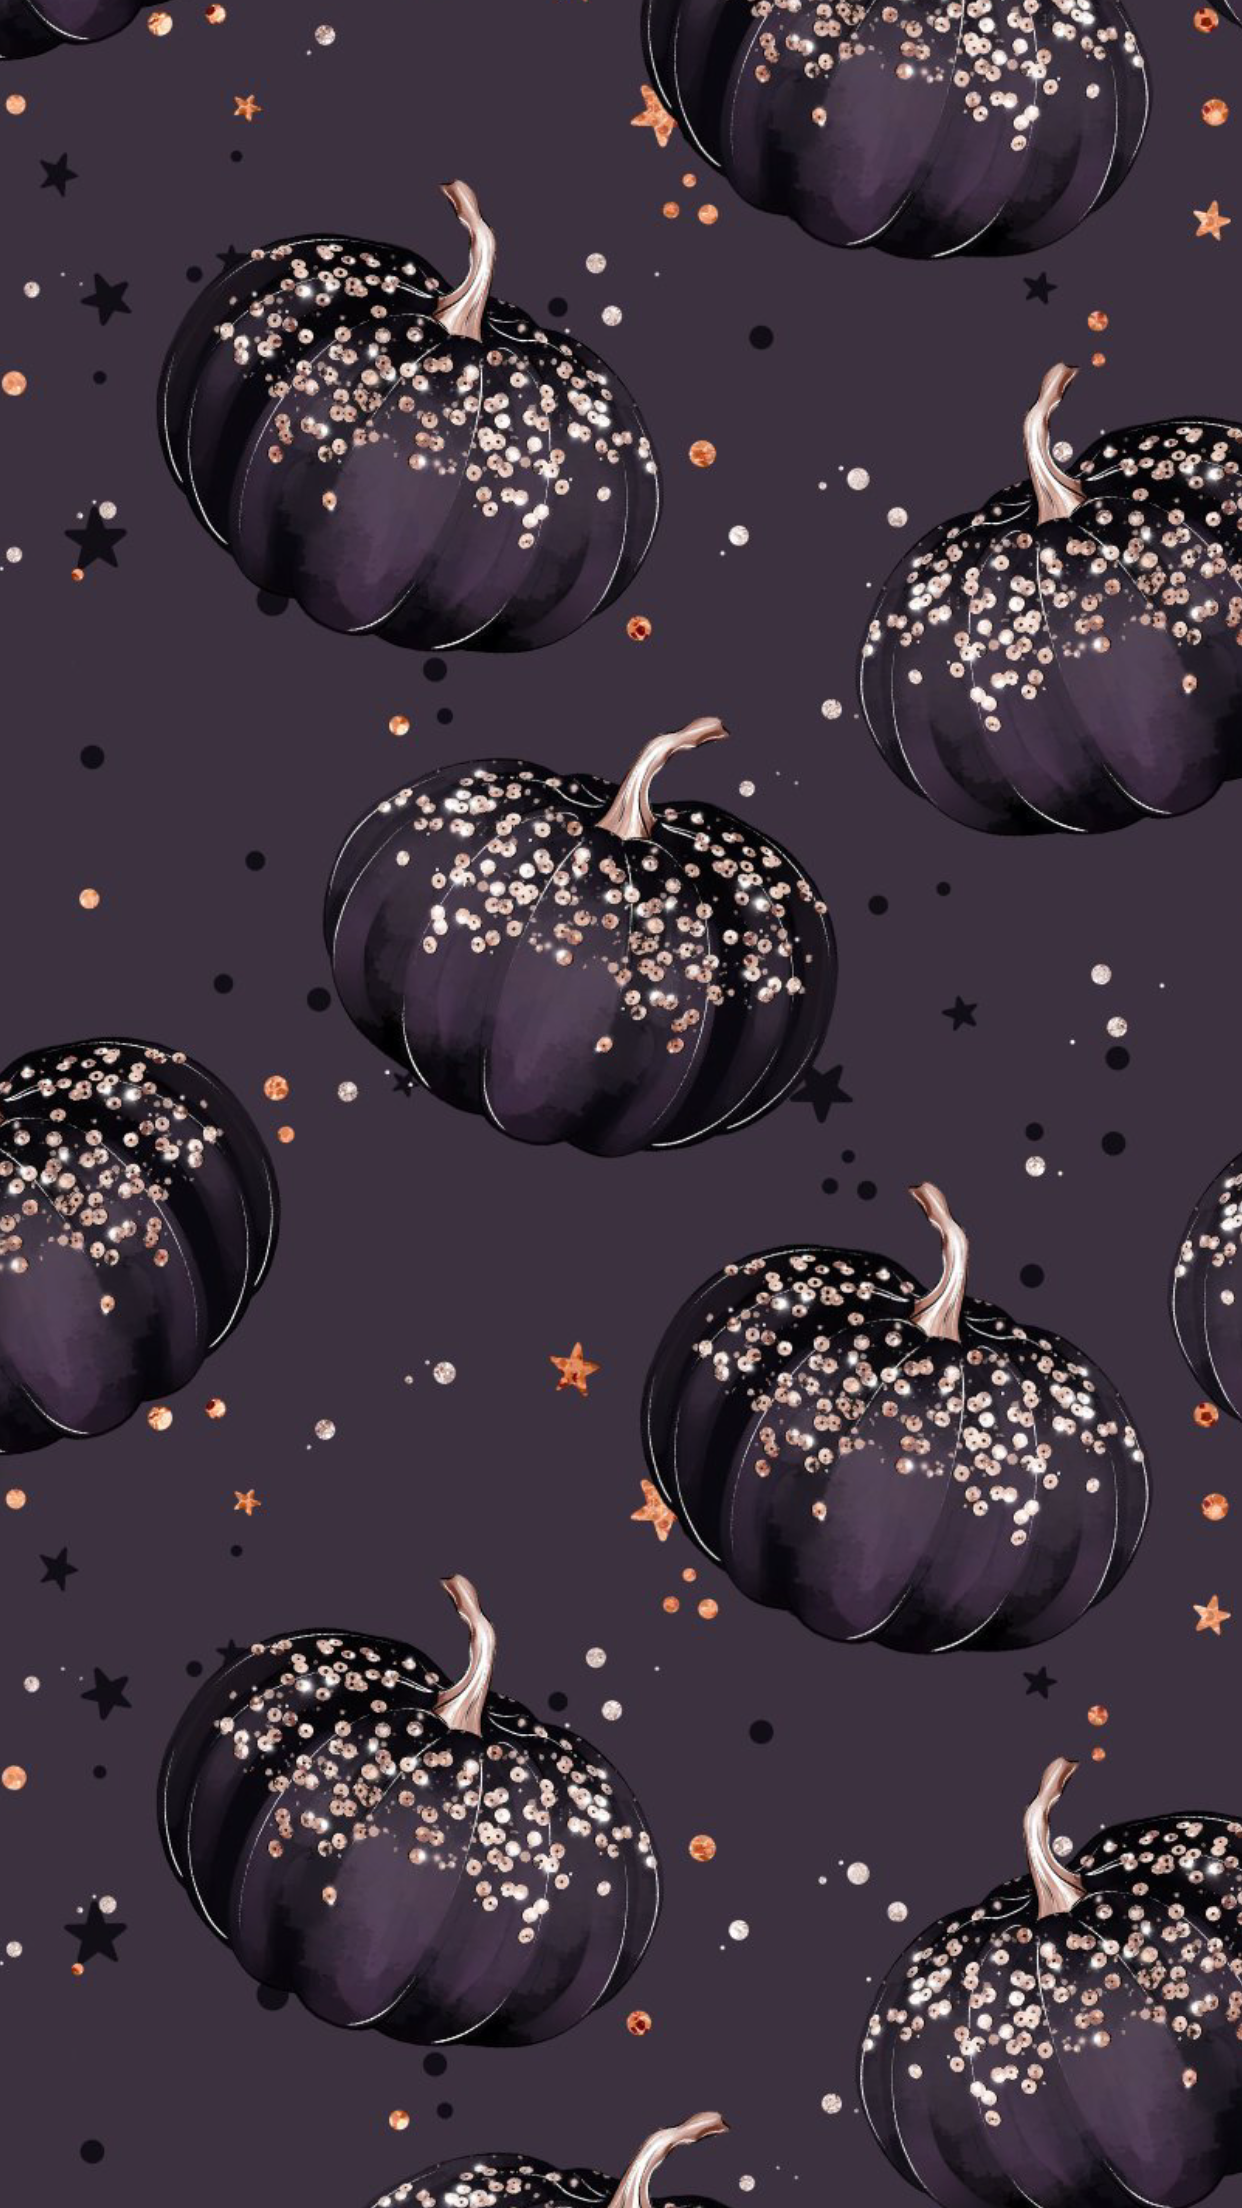 DARK PURPLE CELL PHONE WALLPAPER THAT HAS PURPLE PUMPKINS WITH GOLD GLITTER SPRINKLED ON THEM. Cute fall wallpaper, Fall wallpaper, Halloween wallpaper iphone